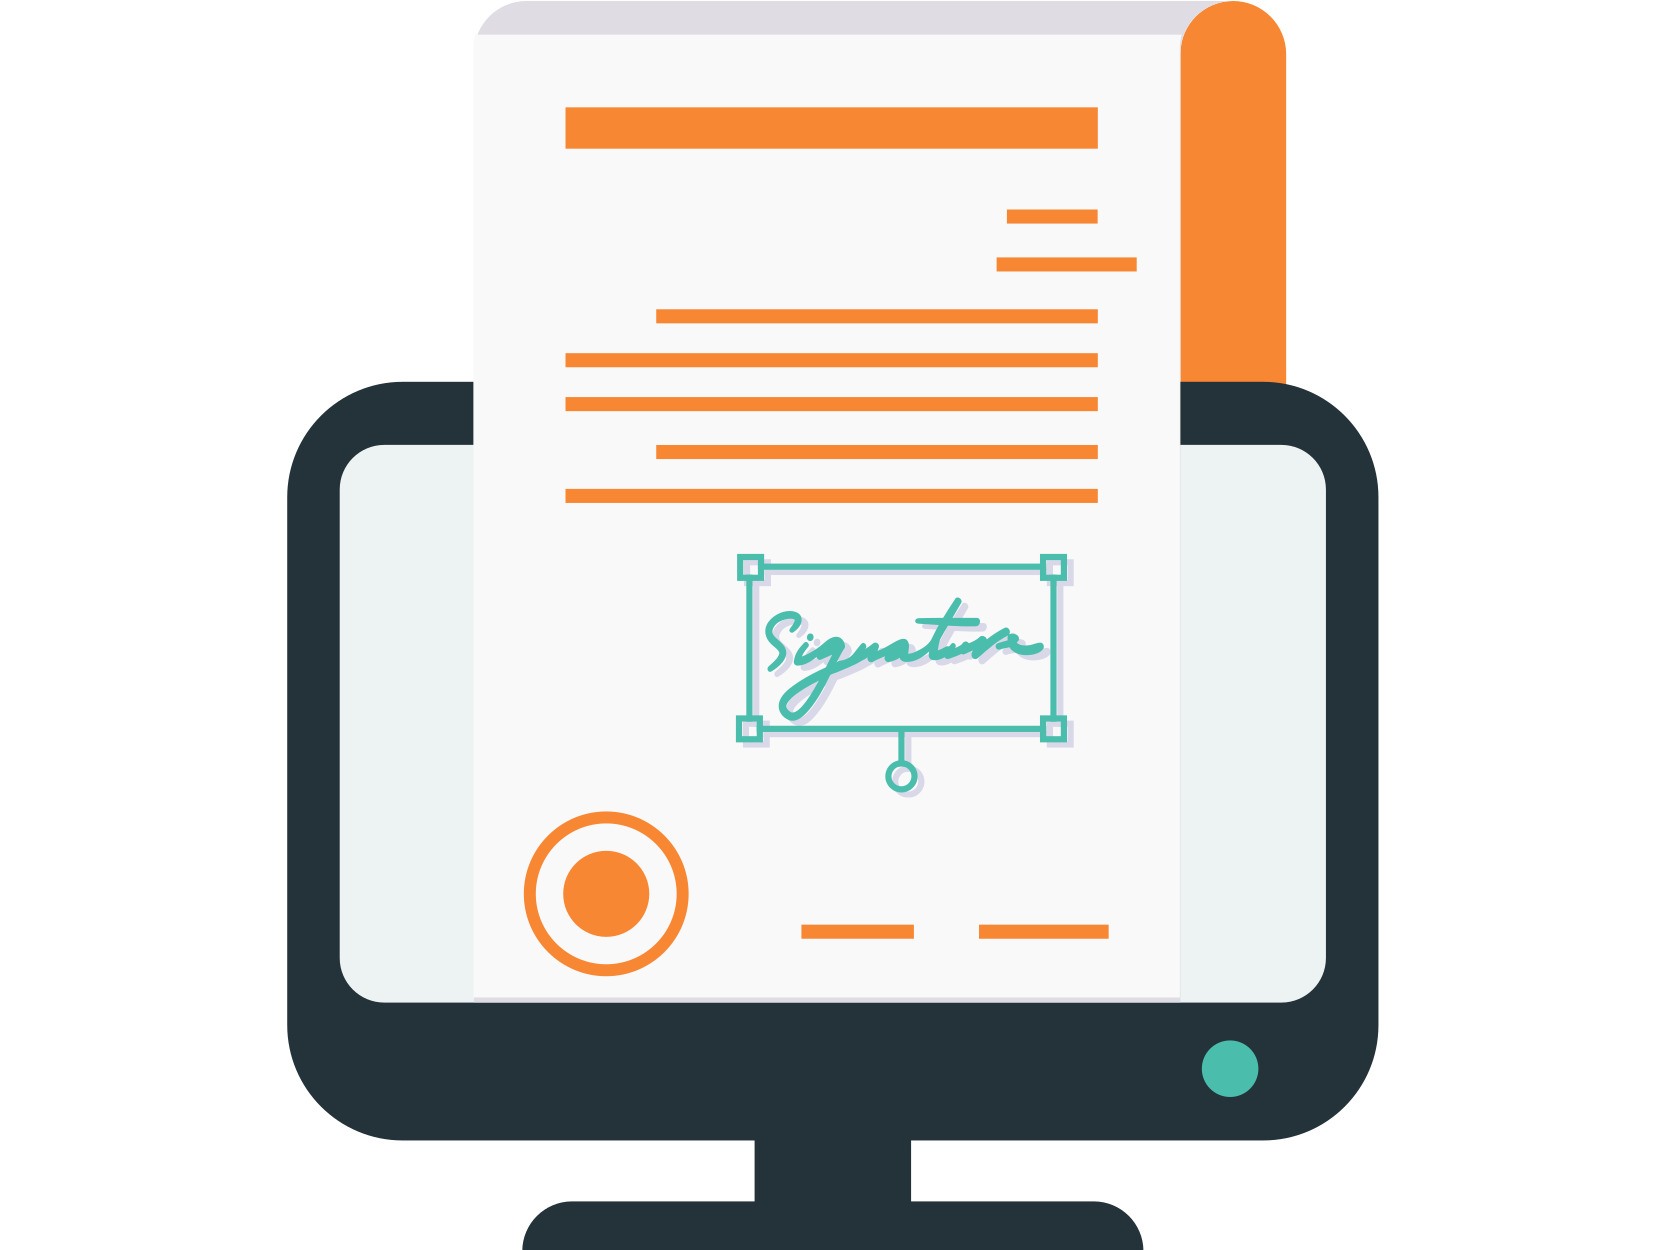 Digital signatures and electronic signatures are similar yet very different.